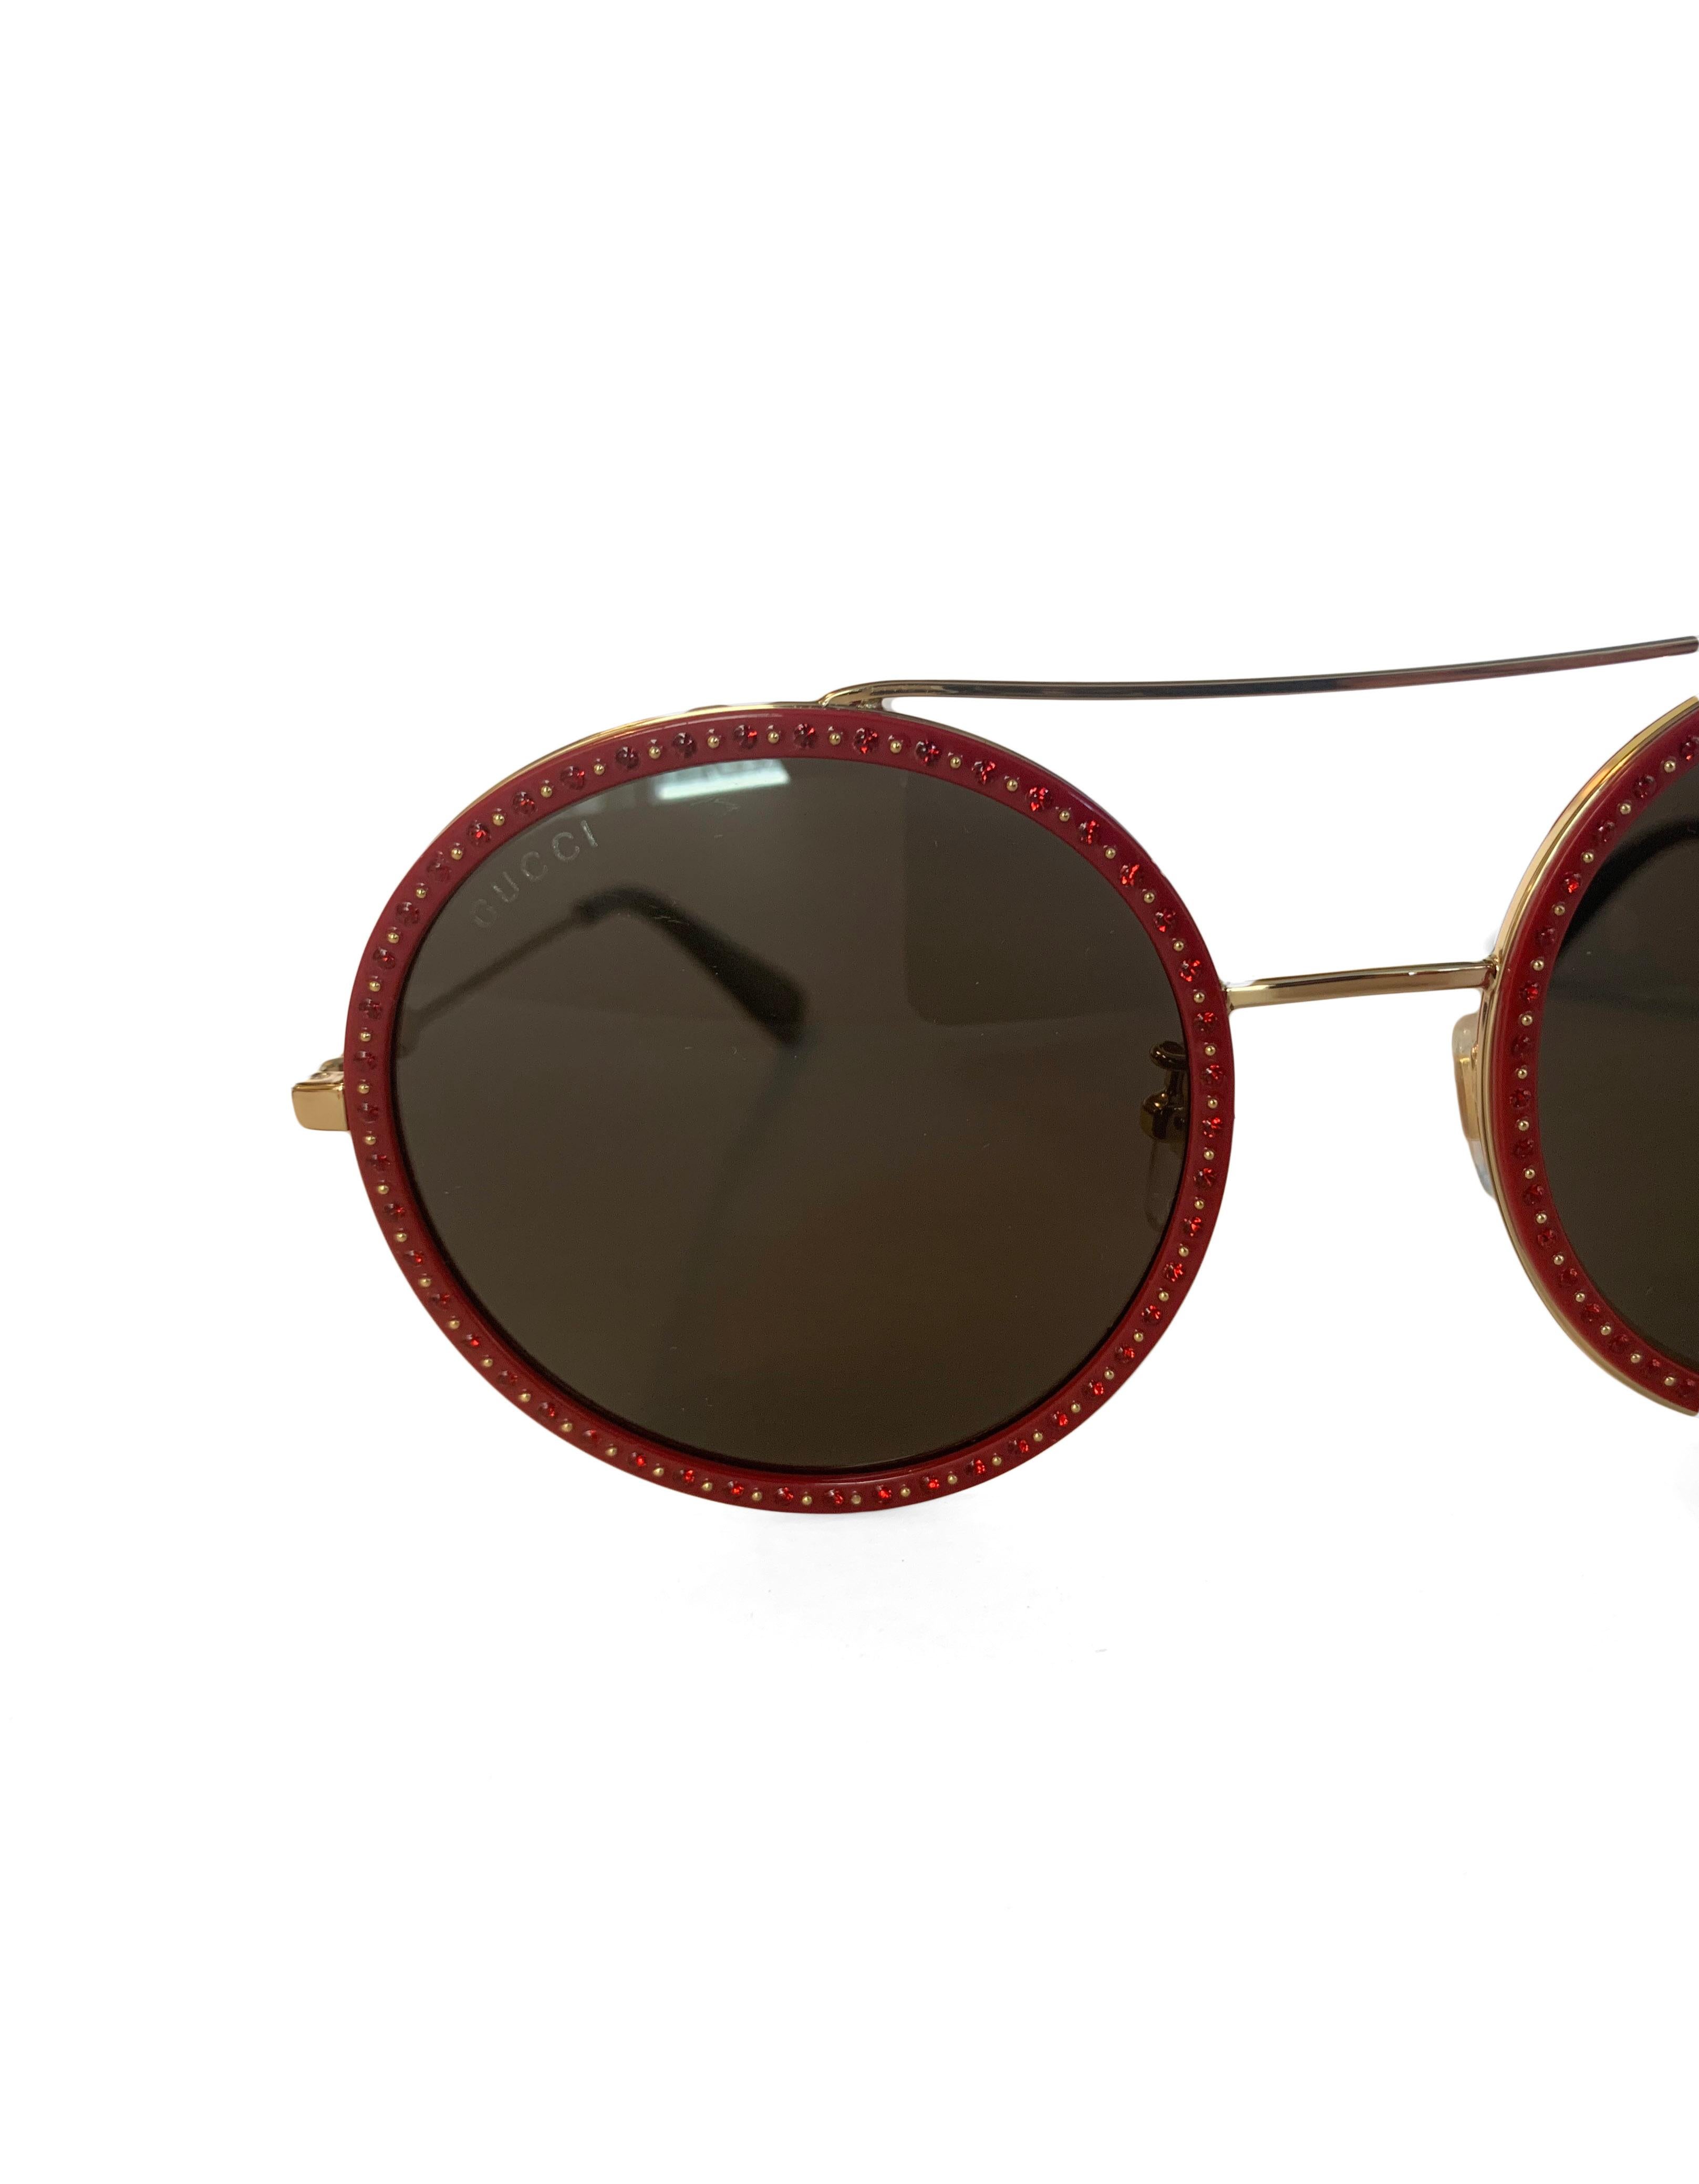 Gucci GG0061S Red Round Frame Sunglasses. Features red crystal and goldtone metal studded detailing. Features small gold GG logo and bee detail at arm

Made In: Japan
Color:Red and gold
Hardware: Goldtone
Materials: Acetate, crystal, metal
Overall